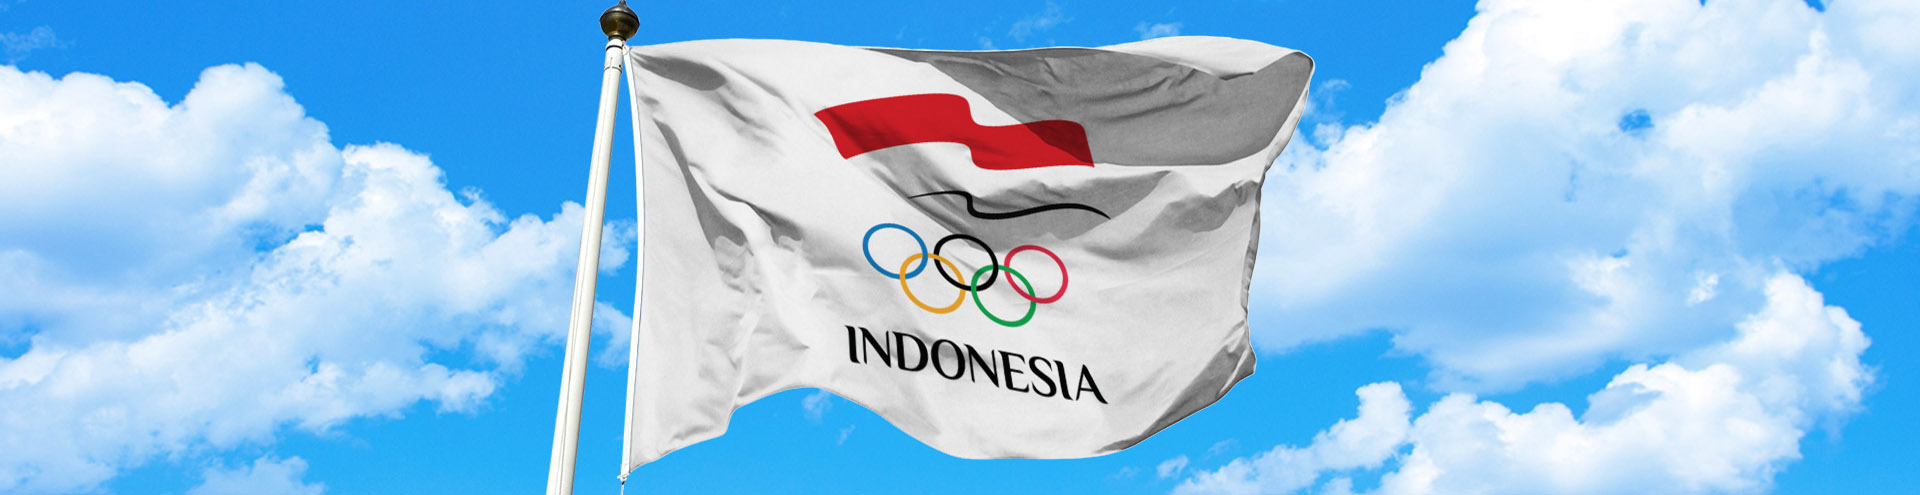 Indonesia Olympic Commitee - NOC Indonesia Promotes Gender Equality